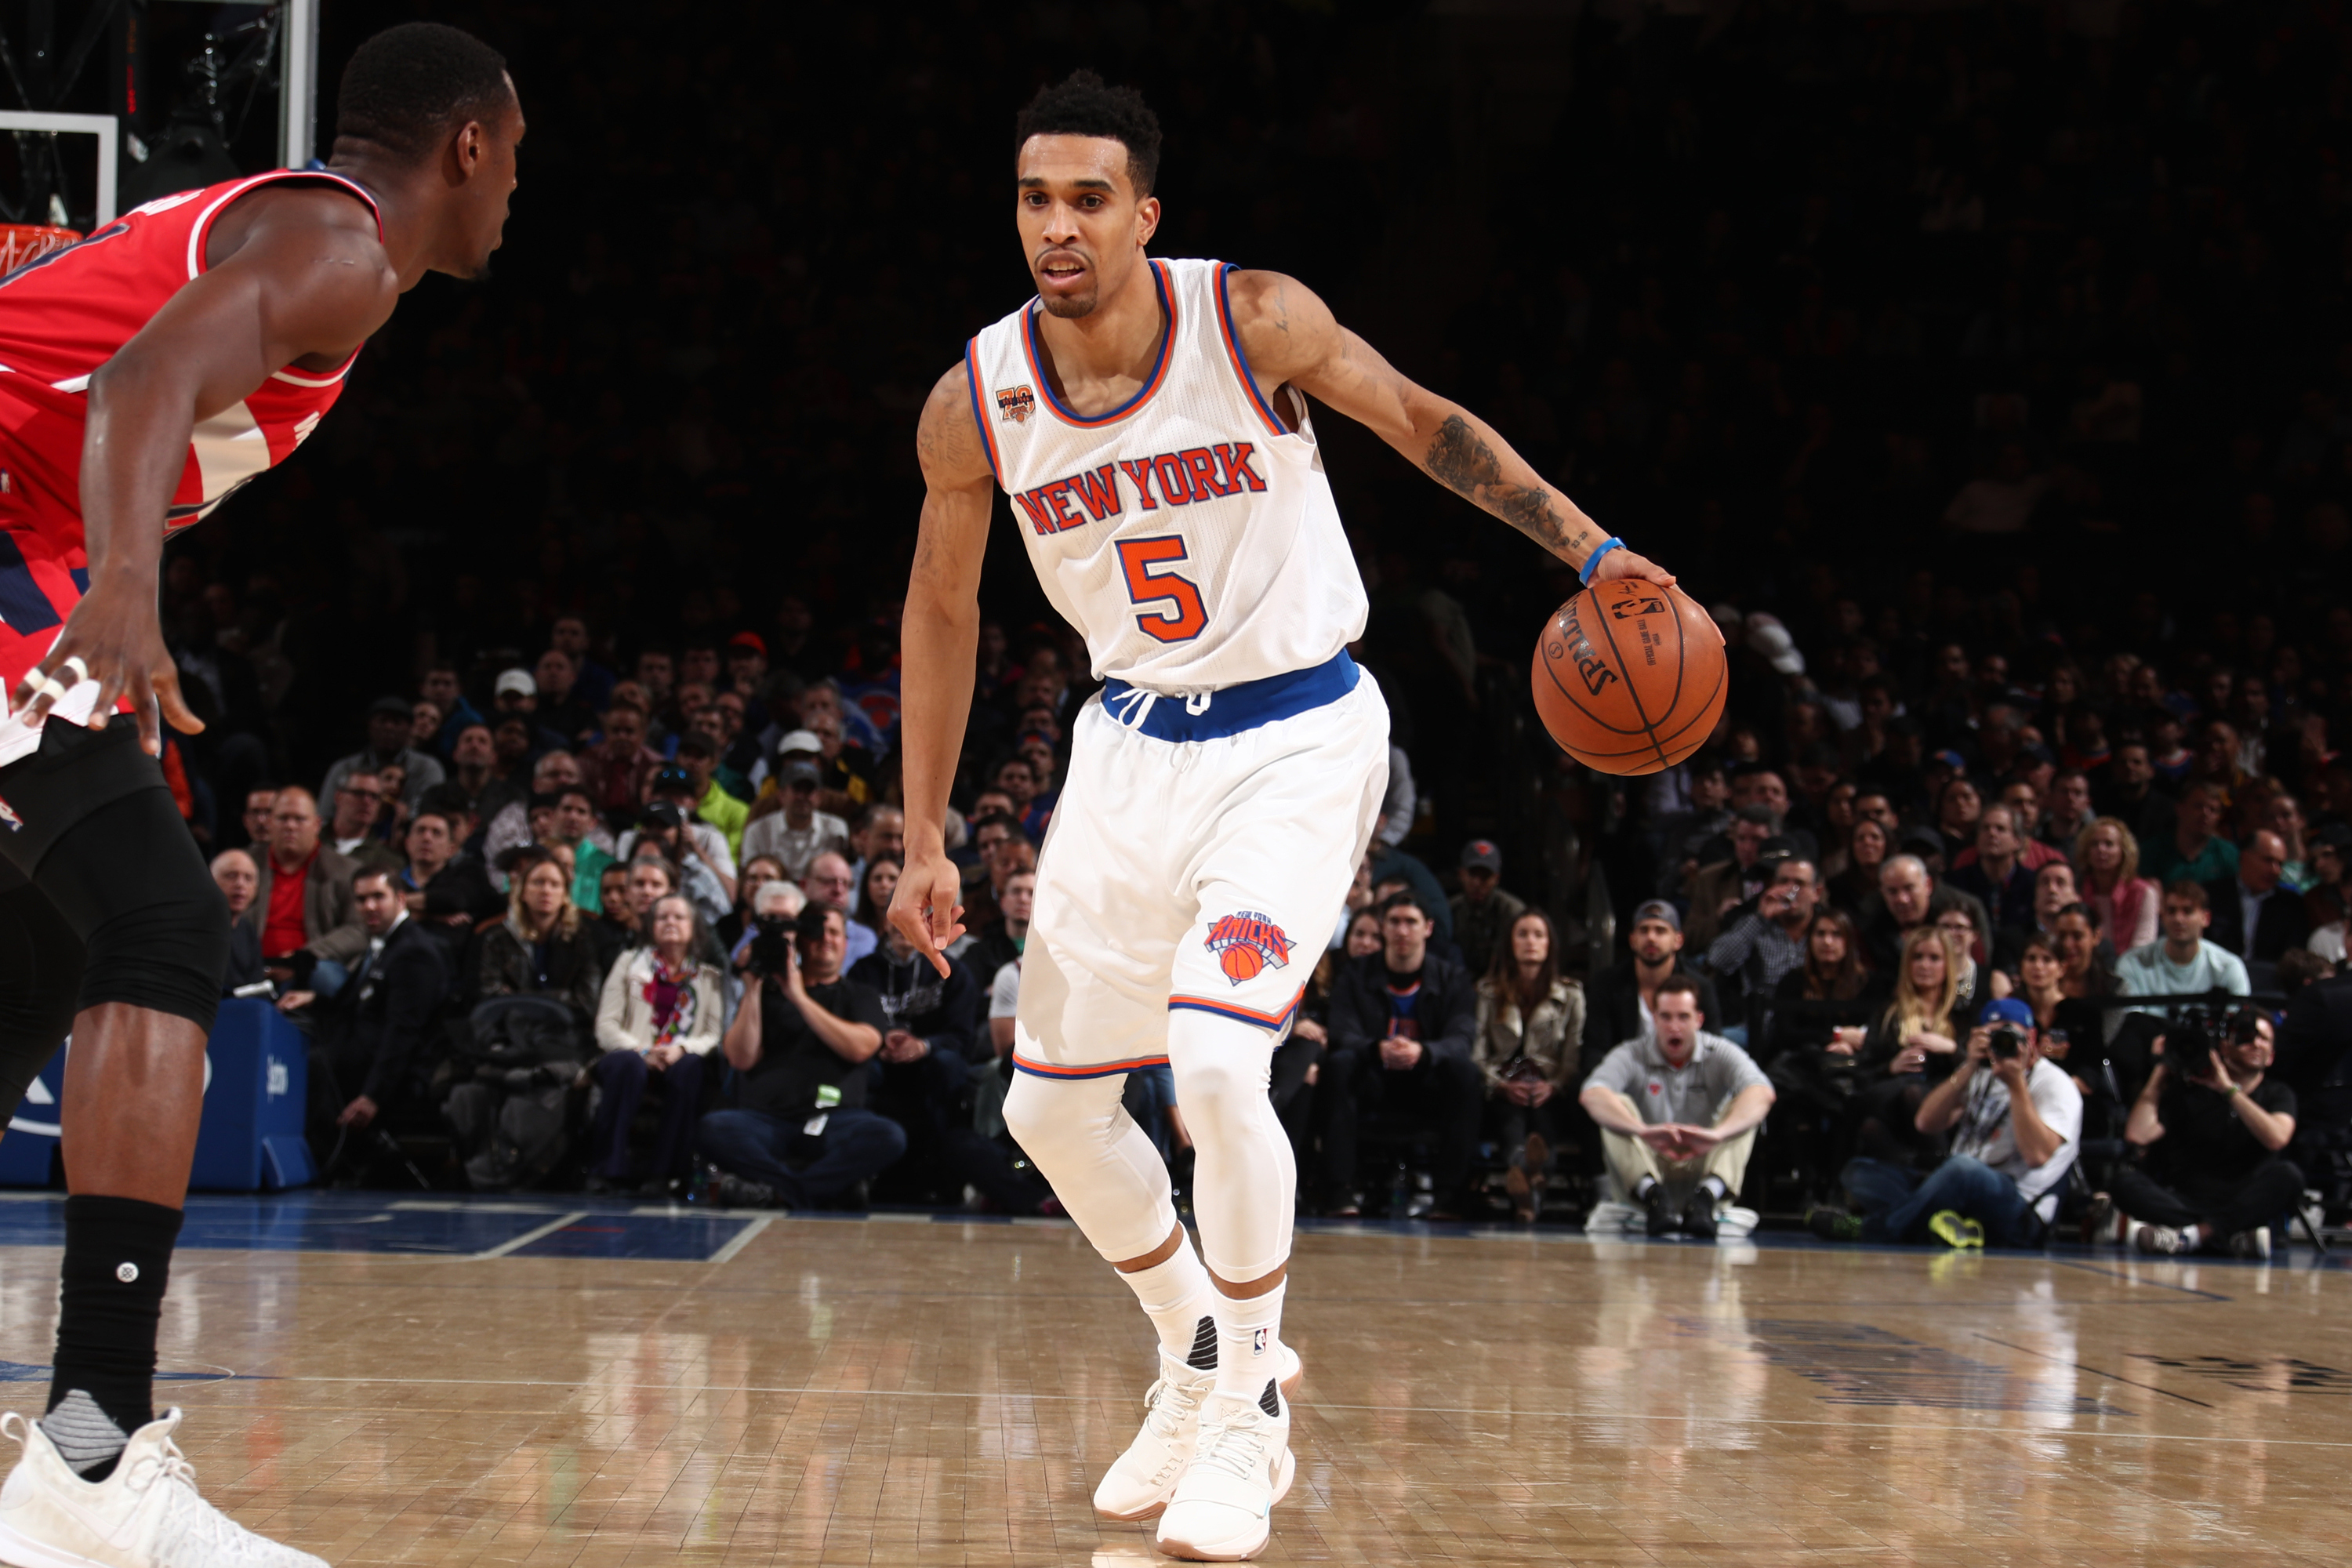 Courtney Lee unfazed by trade speculation - Newsday